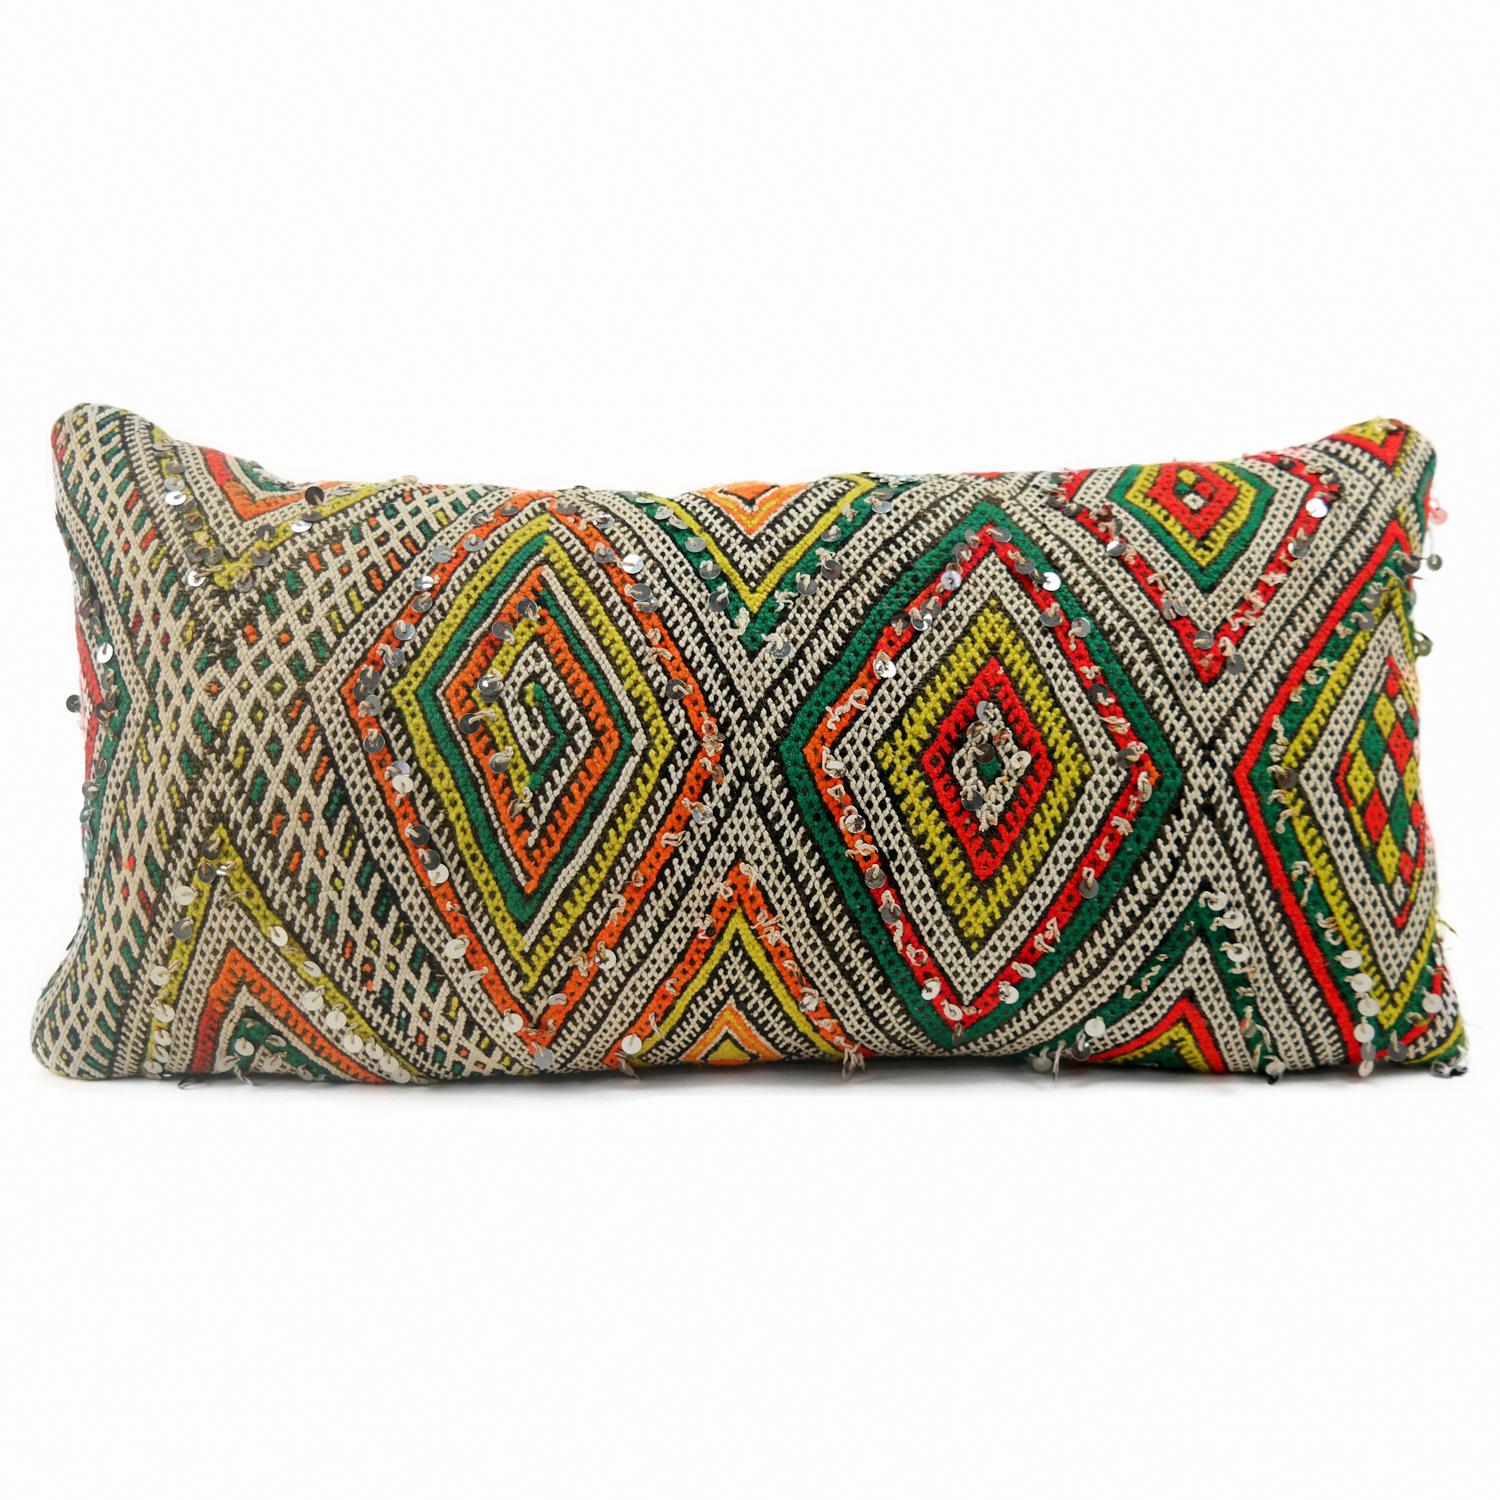 A stunning XL Bohemian Moroccan Kilim cushion custom made in Morocco. Cut from a circa 40 years old hand loomed Kilim rug, from the Middle Atlas Mountains. We have searched and selected the rug ourselves. The pillow has beautiful colors like yellow,